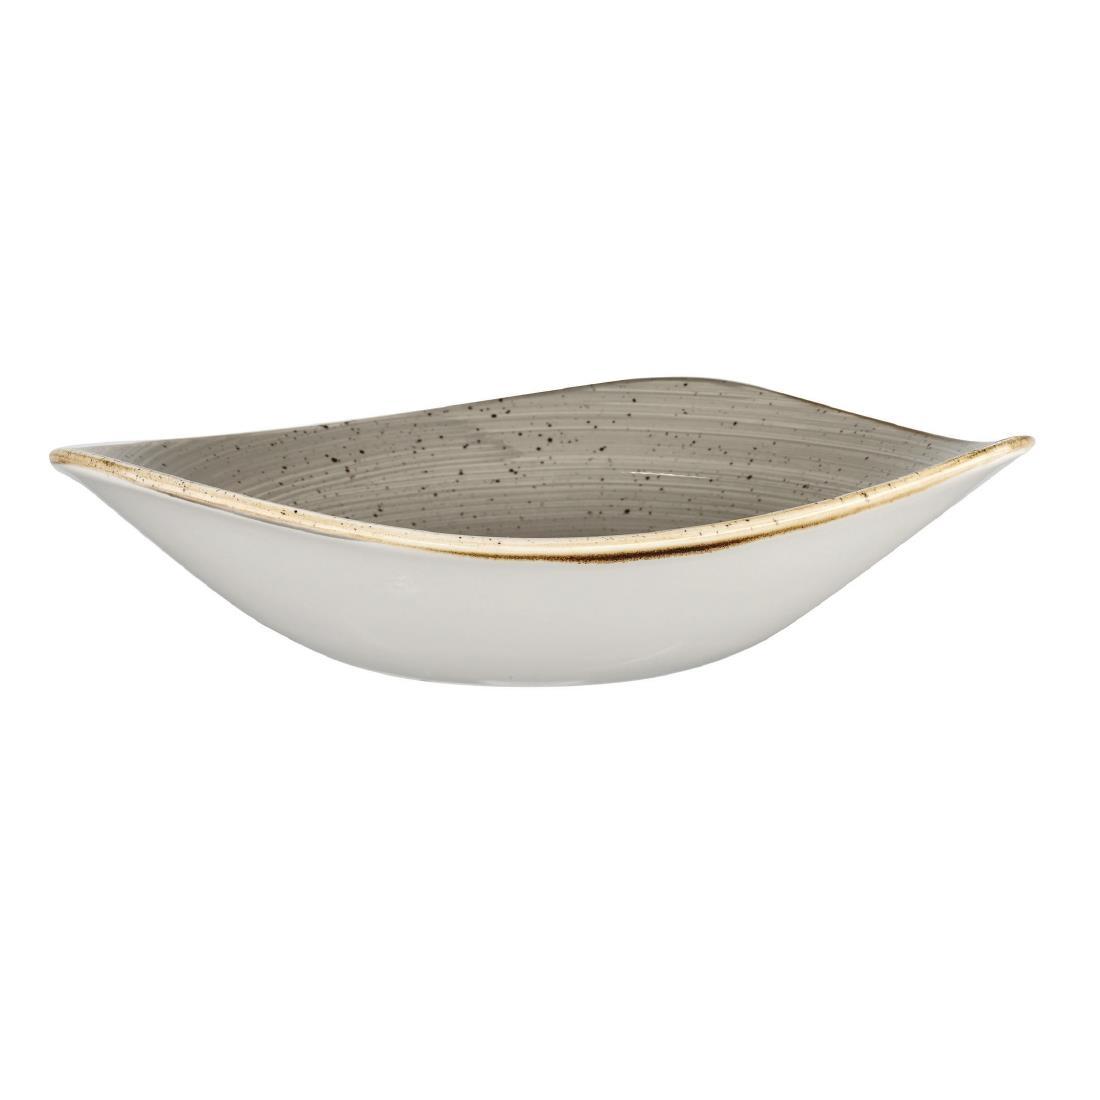 Churchill Stonecast Triangle Bowl Peppercorn Grey 250mm (Pack of 12) - DK560  - 3